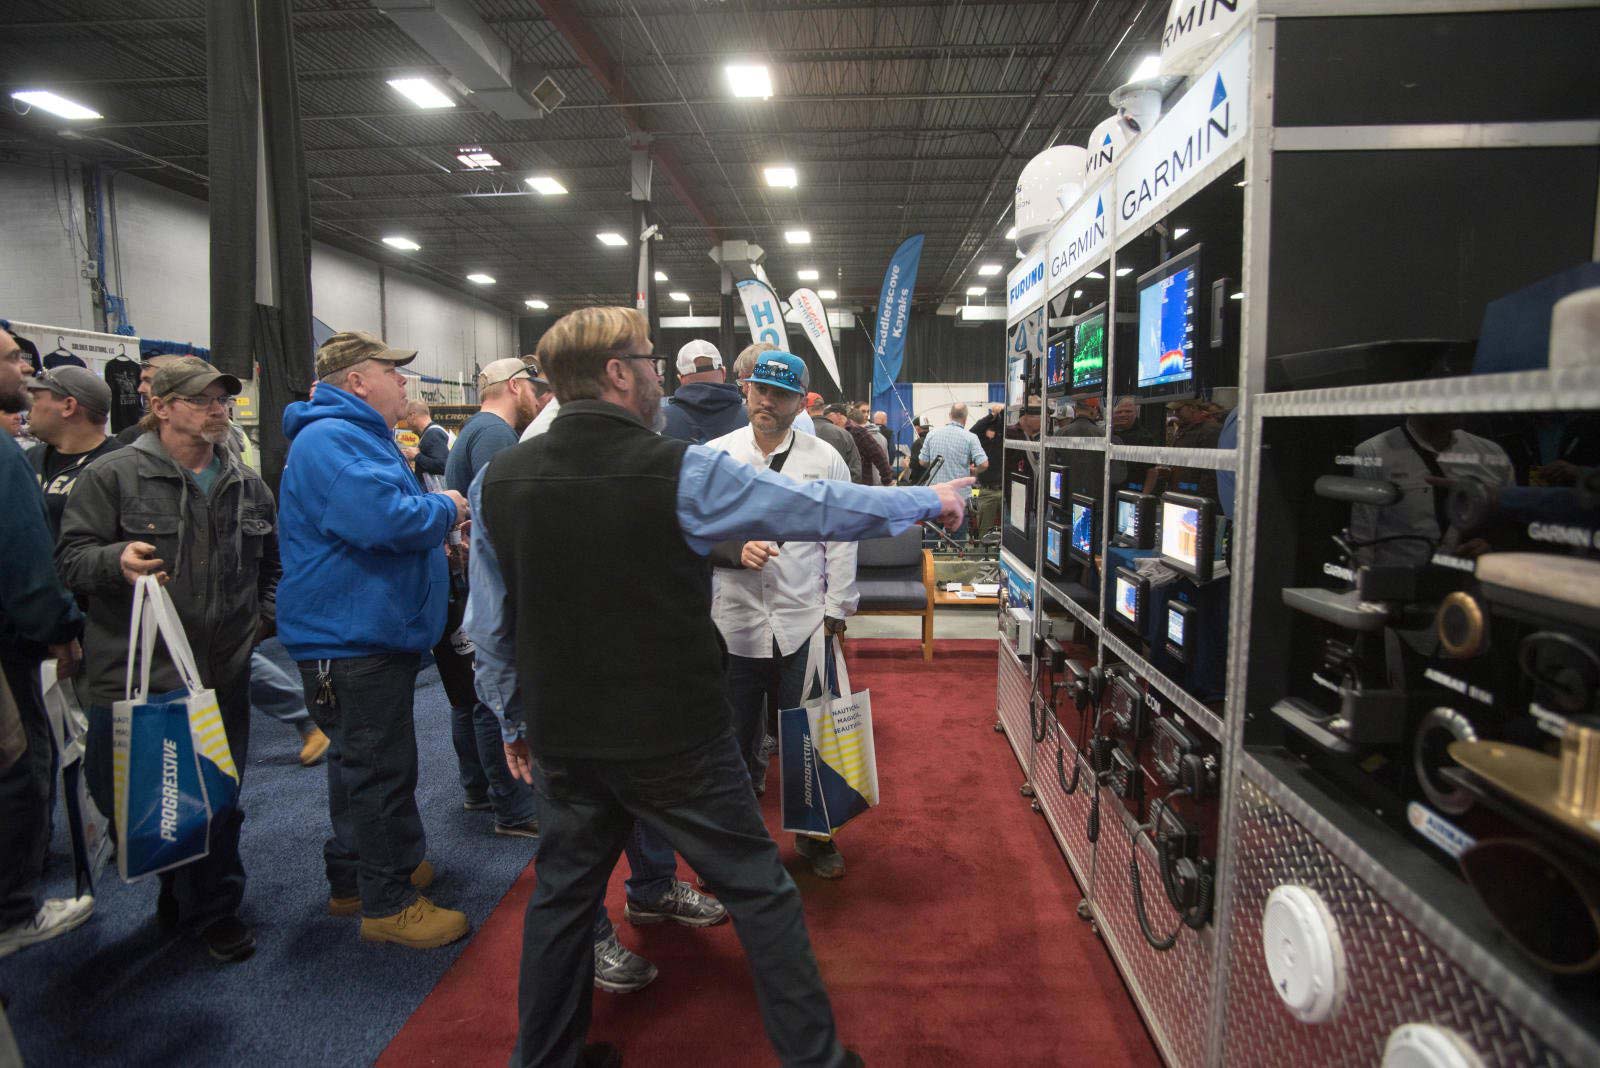 Saltwater Fishing Expo On Tap This Weekend in Edison, NJ